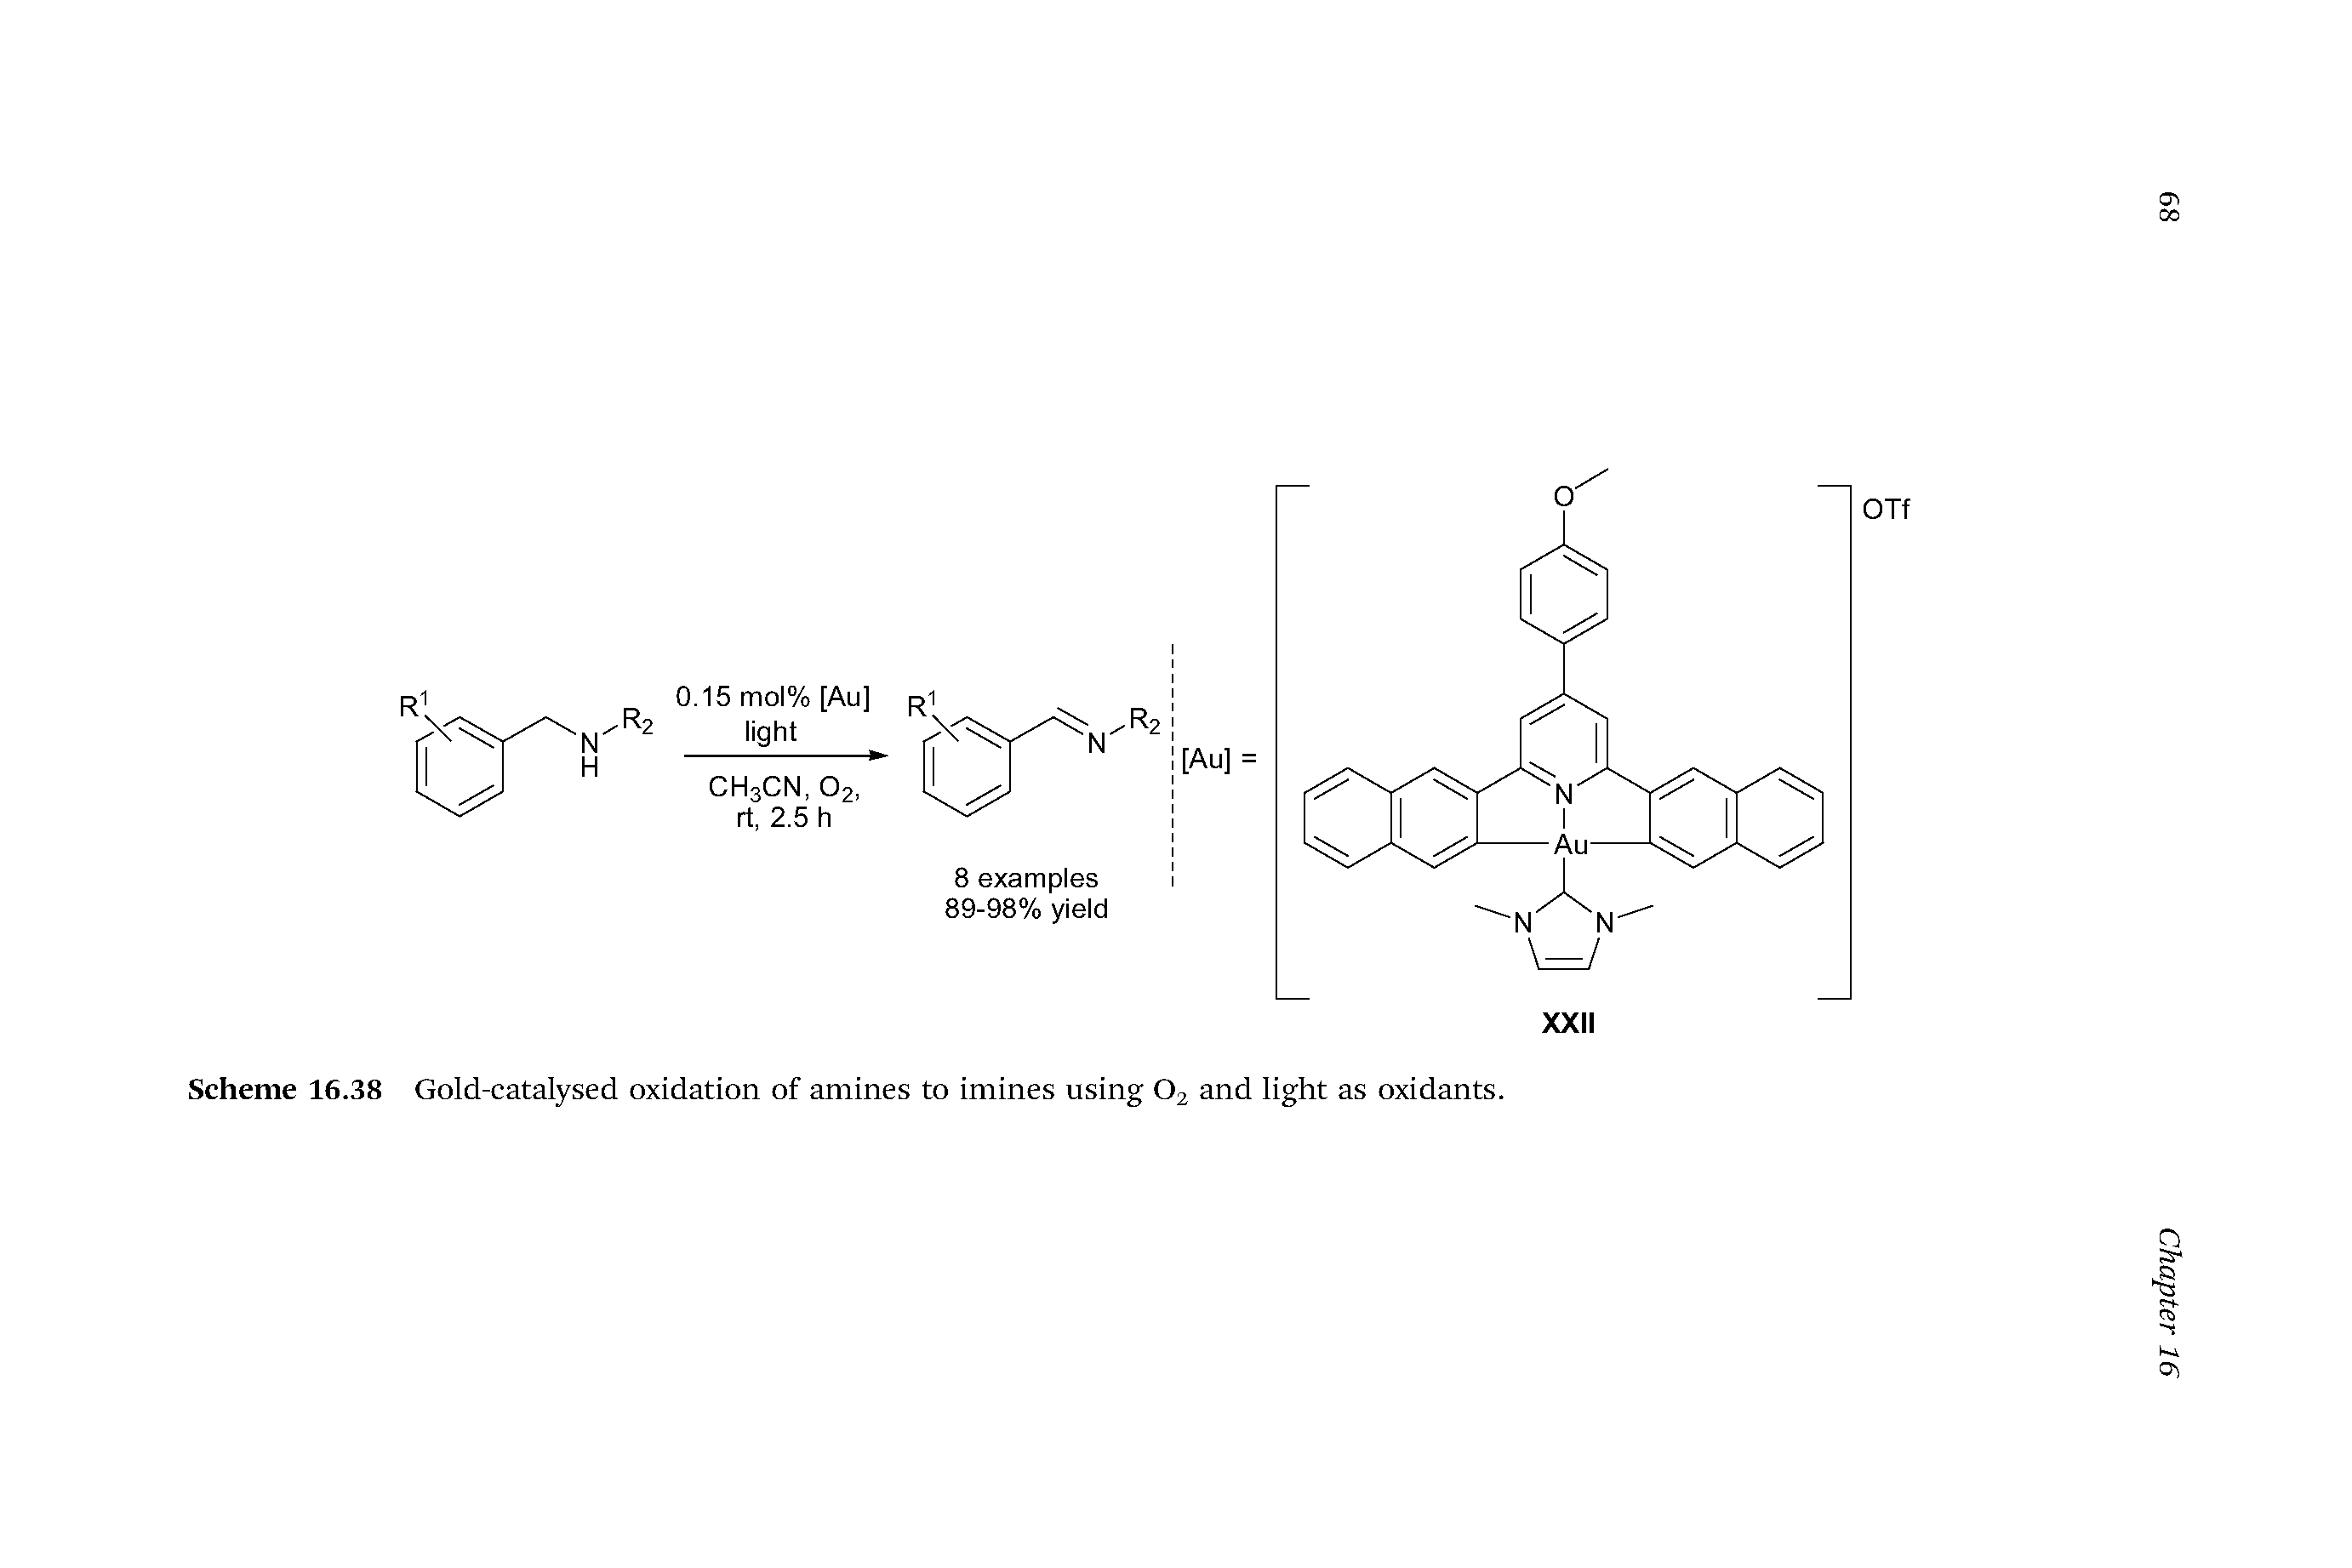 Scheme 16.38 Gold-catalysed oxidation of amines to imines using O2 and light as oxidants.